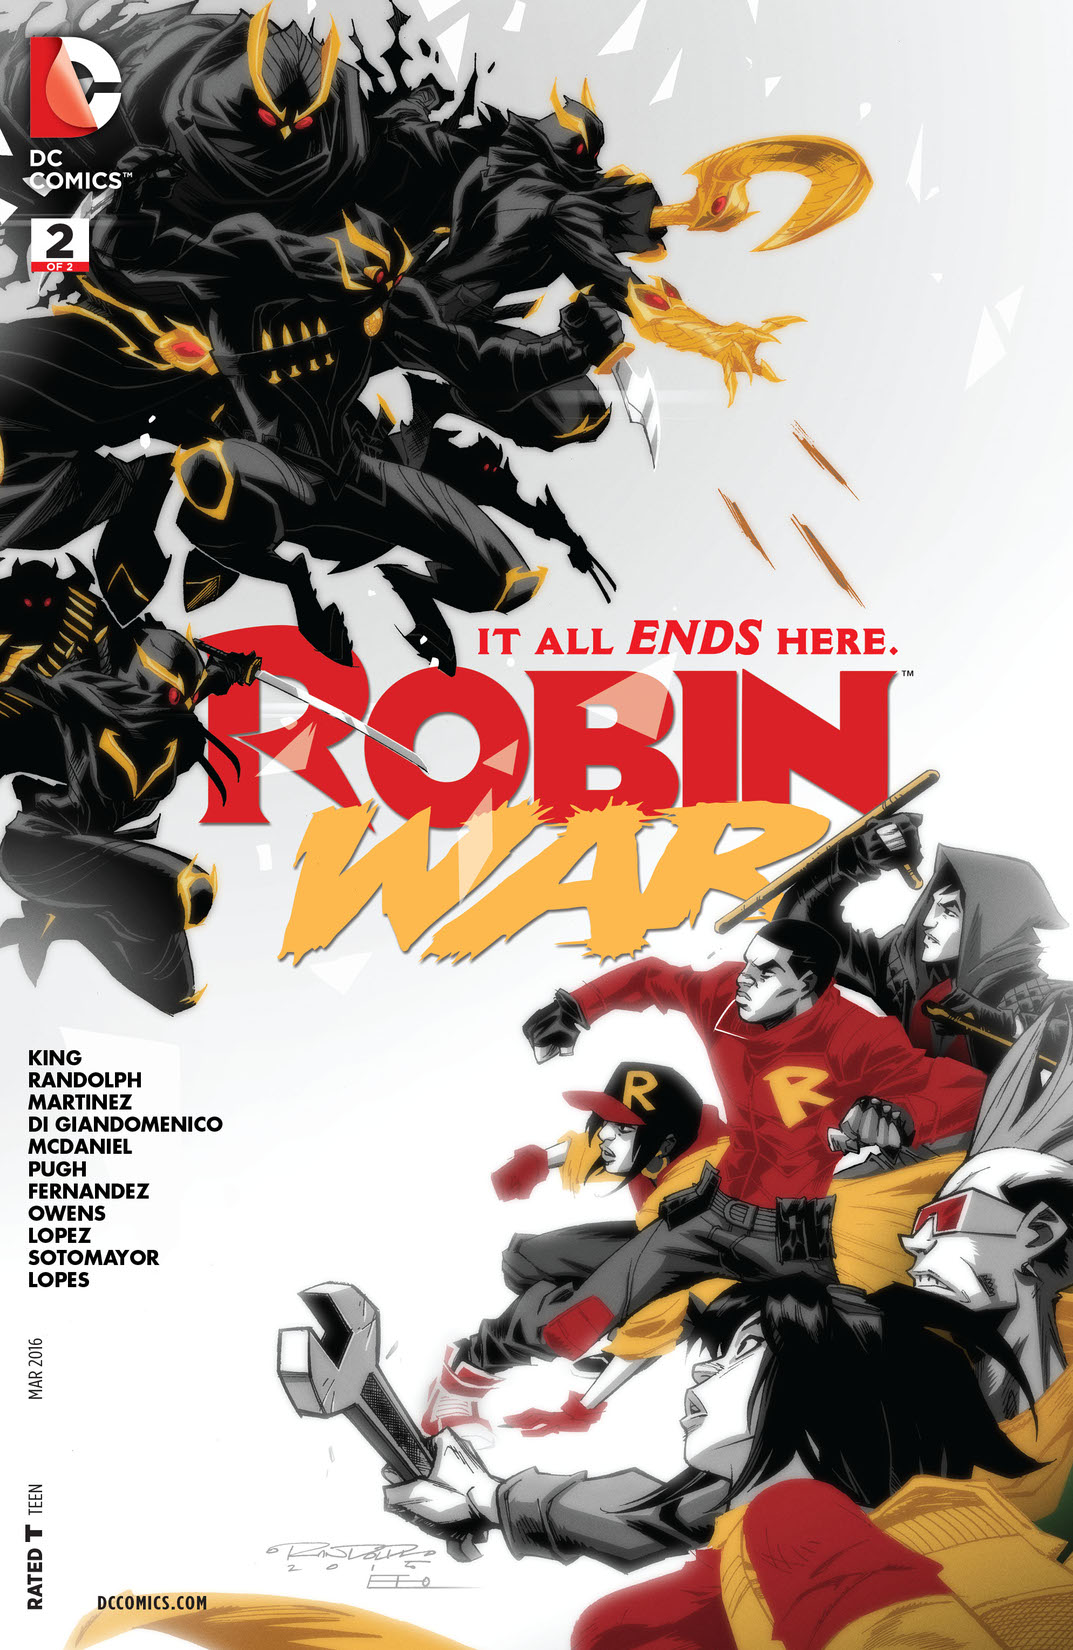 Robin War #2 preview images